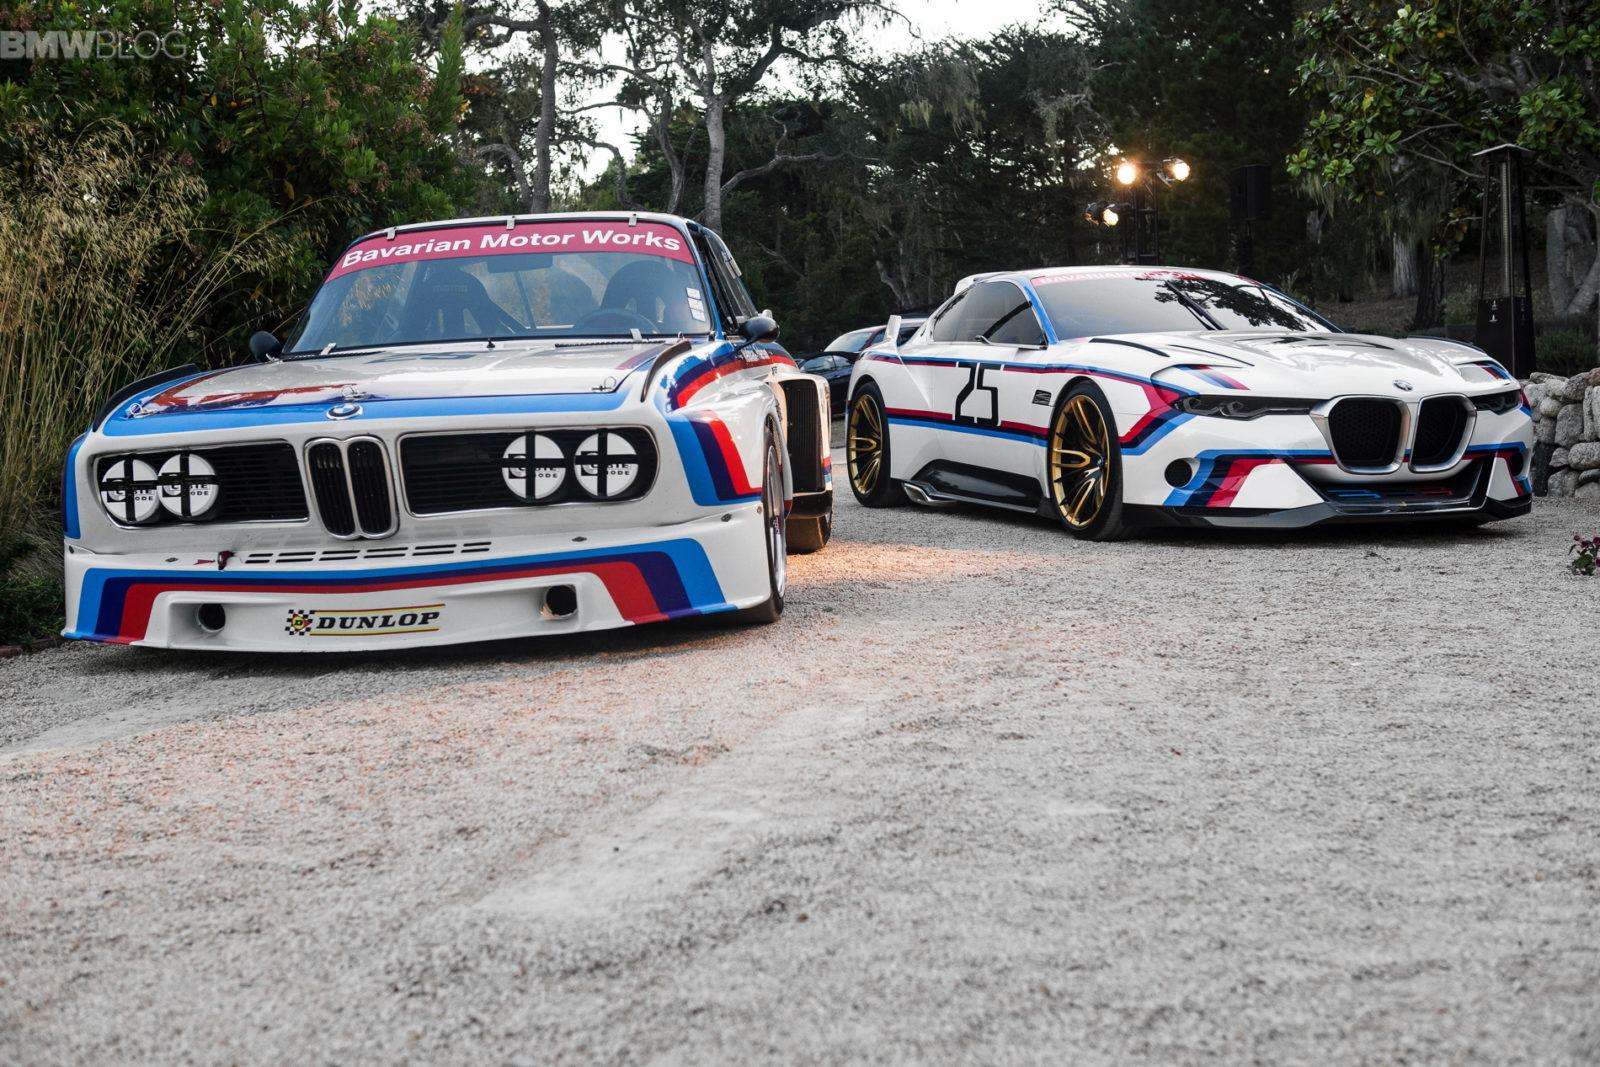 BMW 3.0 CSL Hommage Racing Pebble Beach images 13 750x500